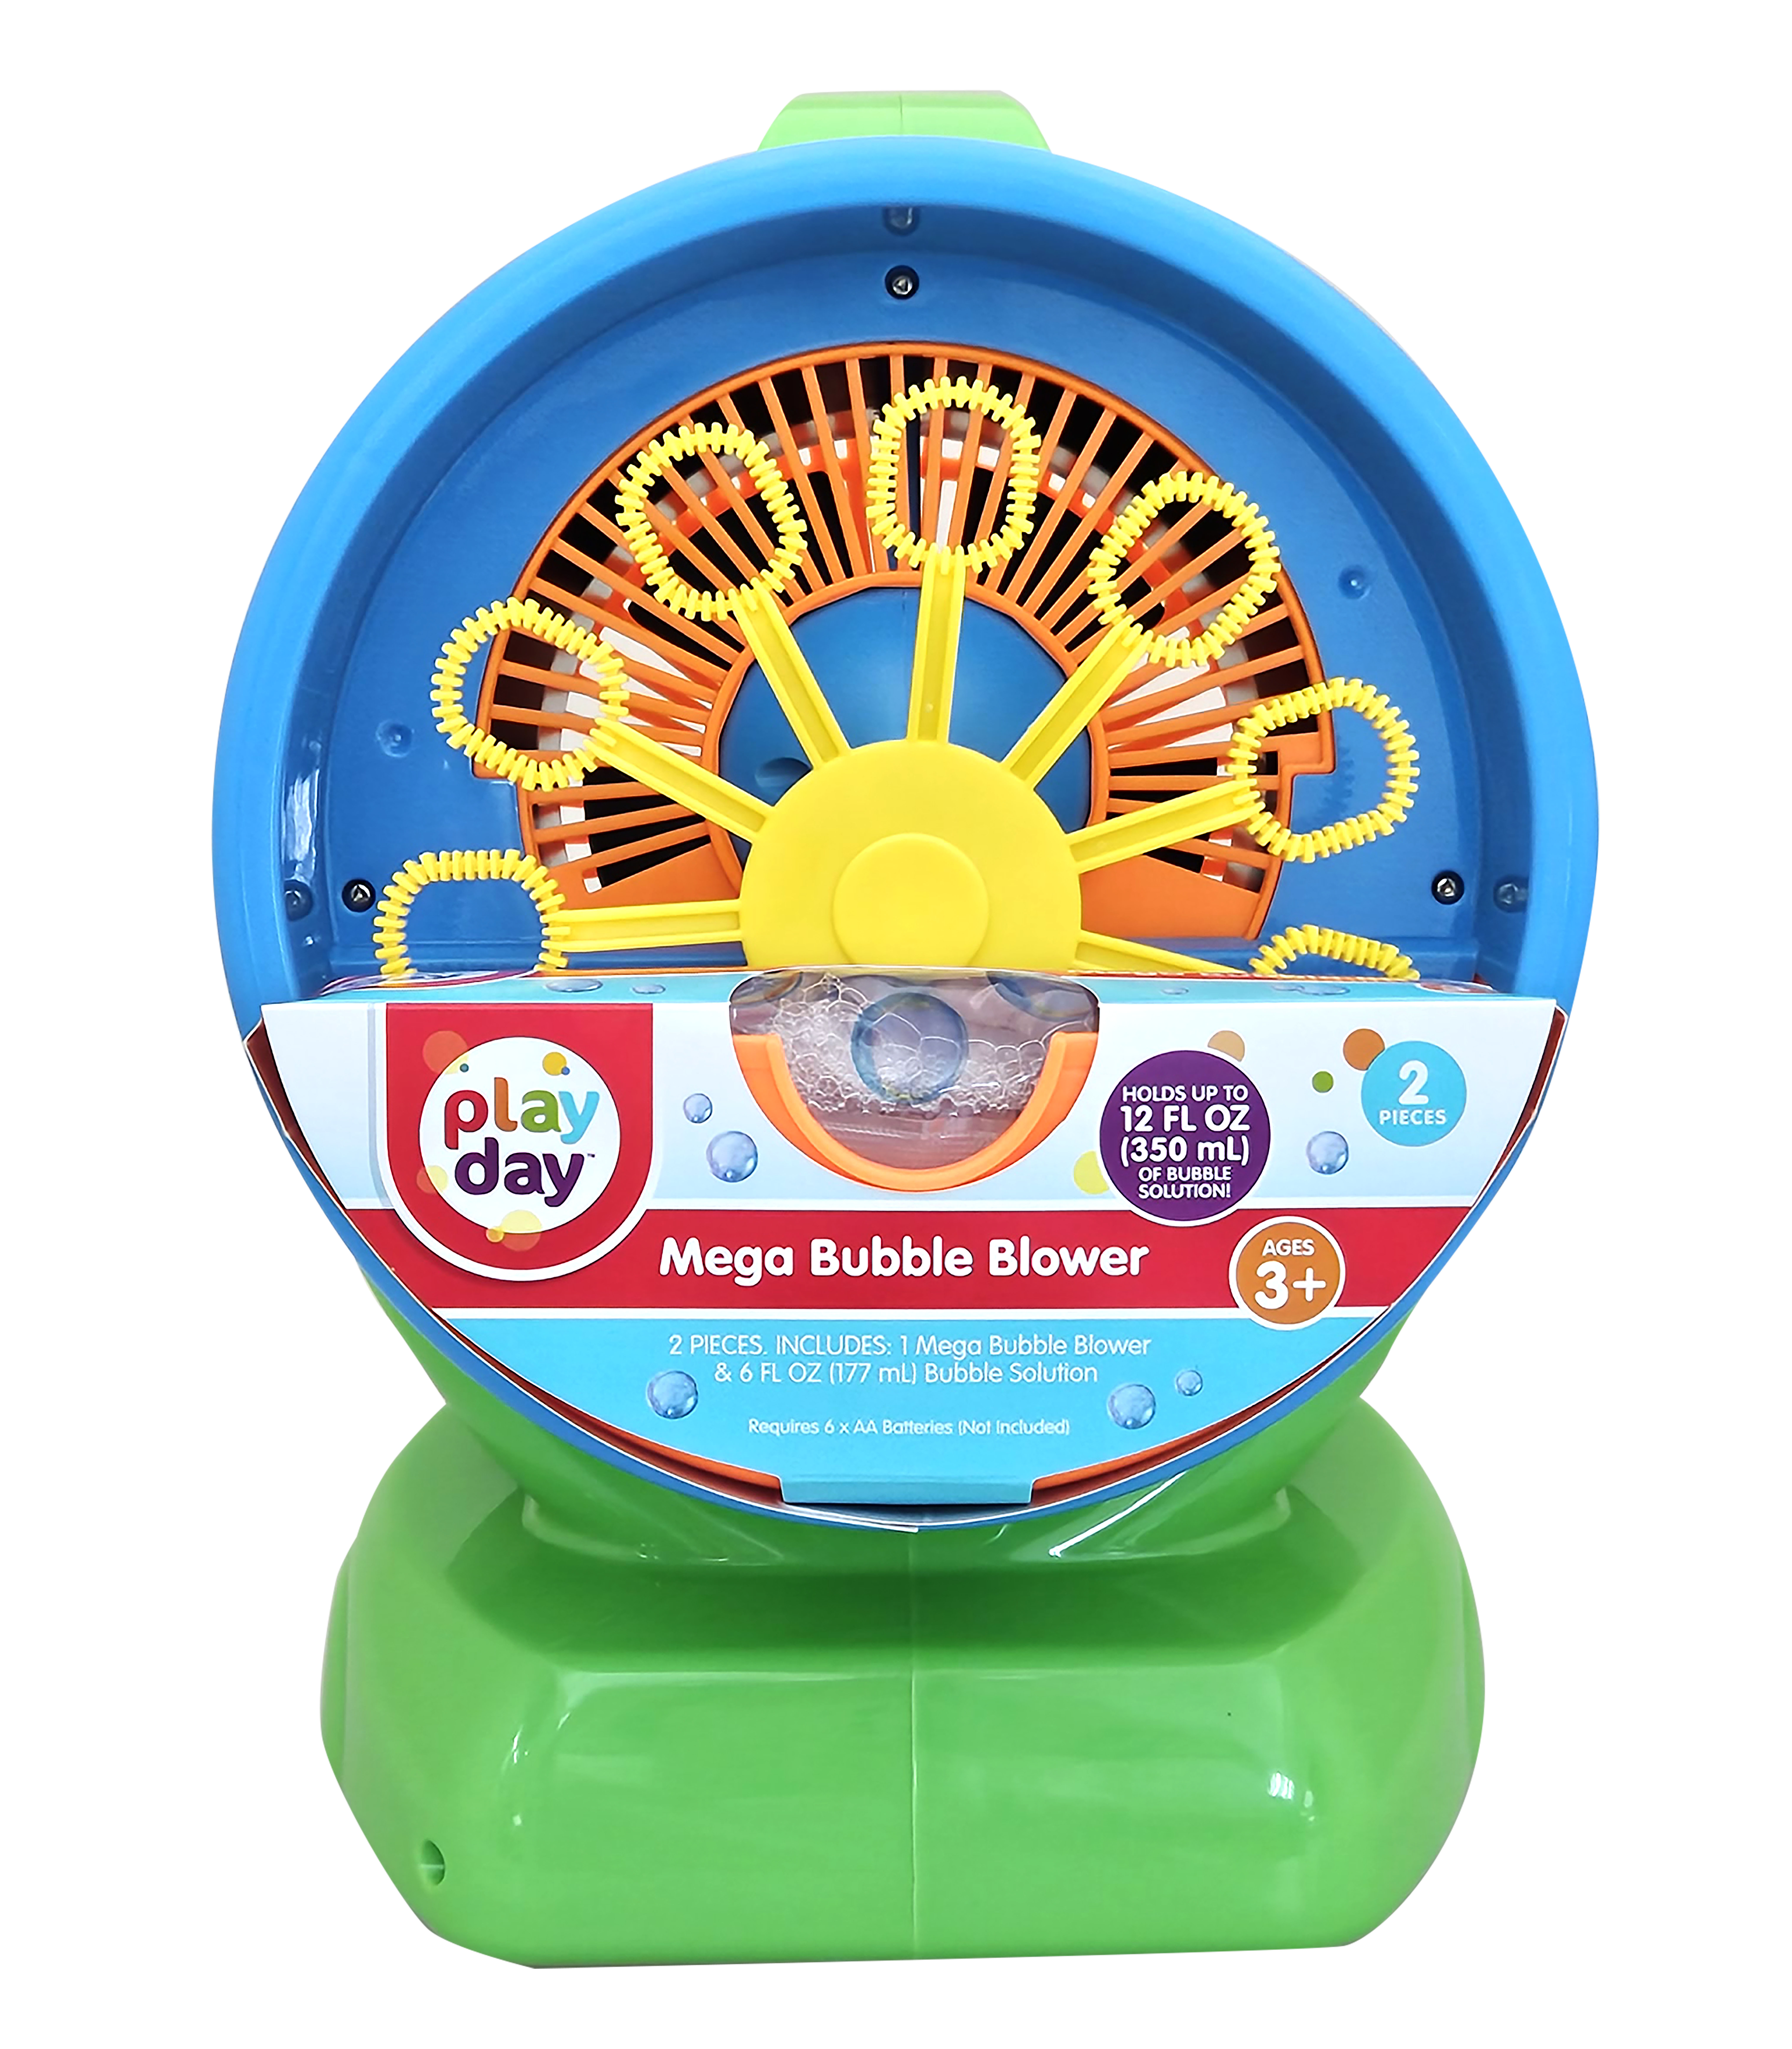 Play Day Mega Bubble Blower, Battery Operated, Bubble Blowing Toy Machine - image 2 of 7